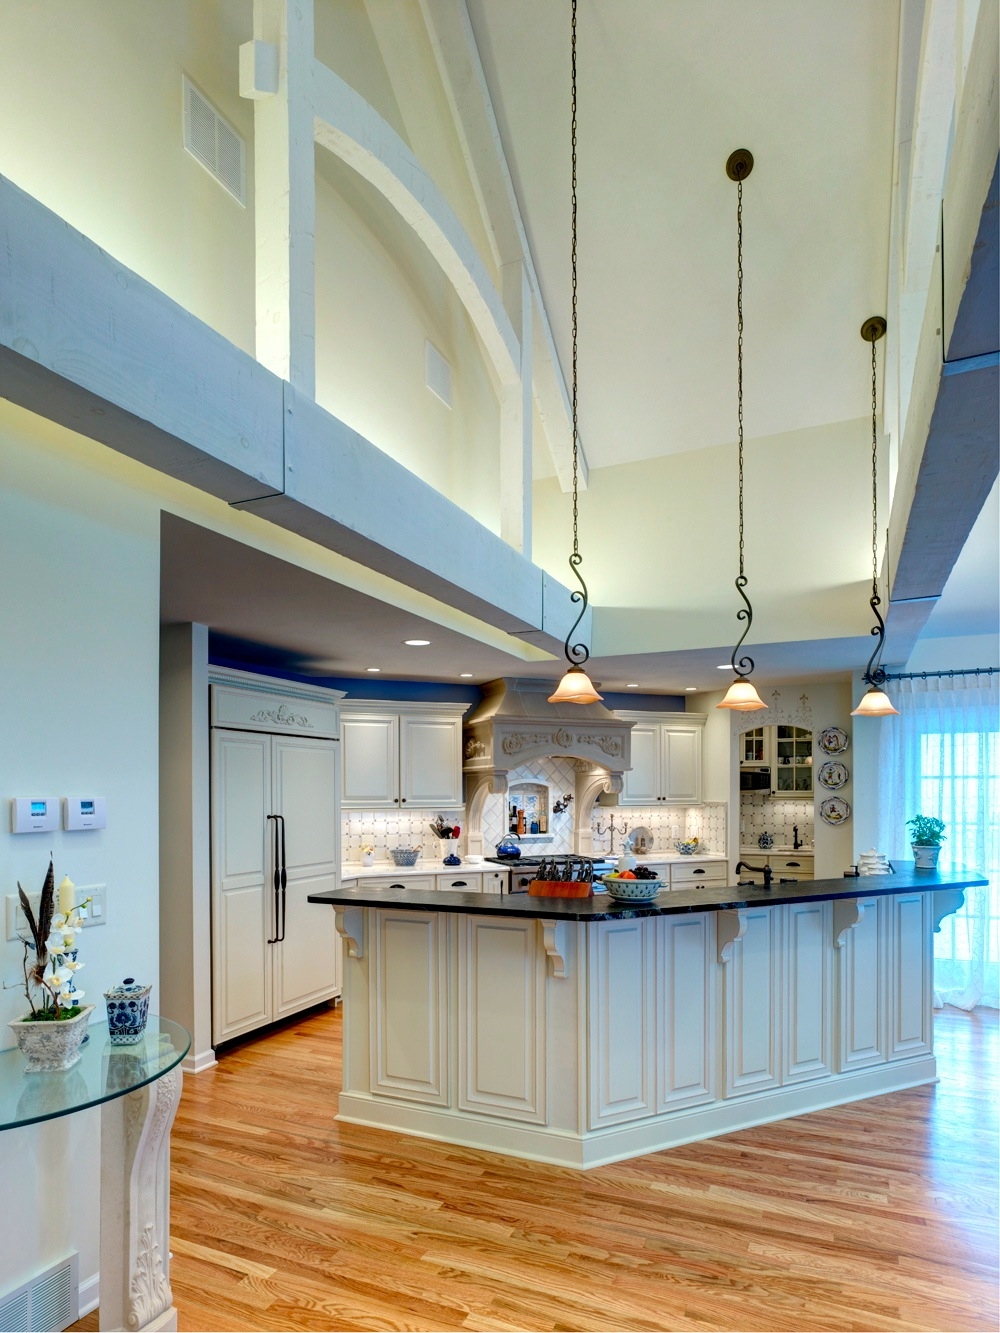 Light Fixtures For High Vaulted Ceilings